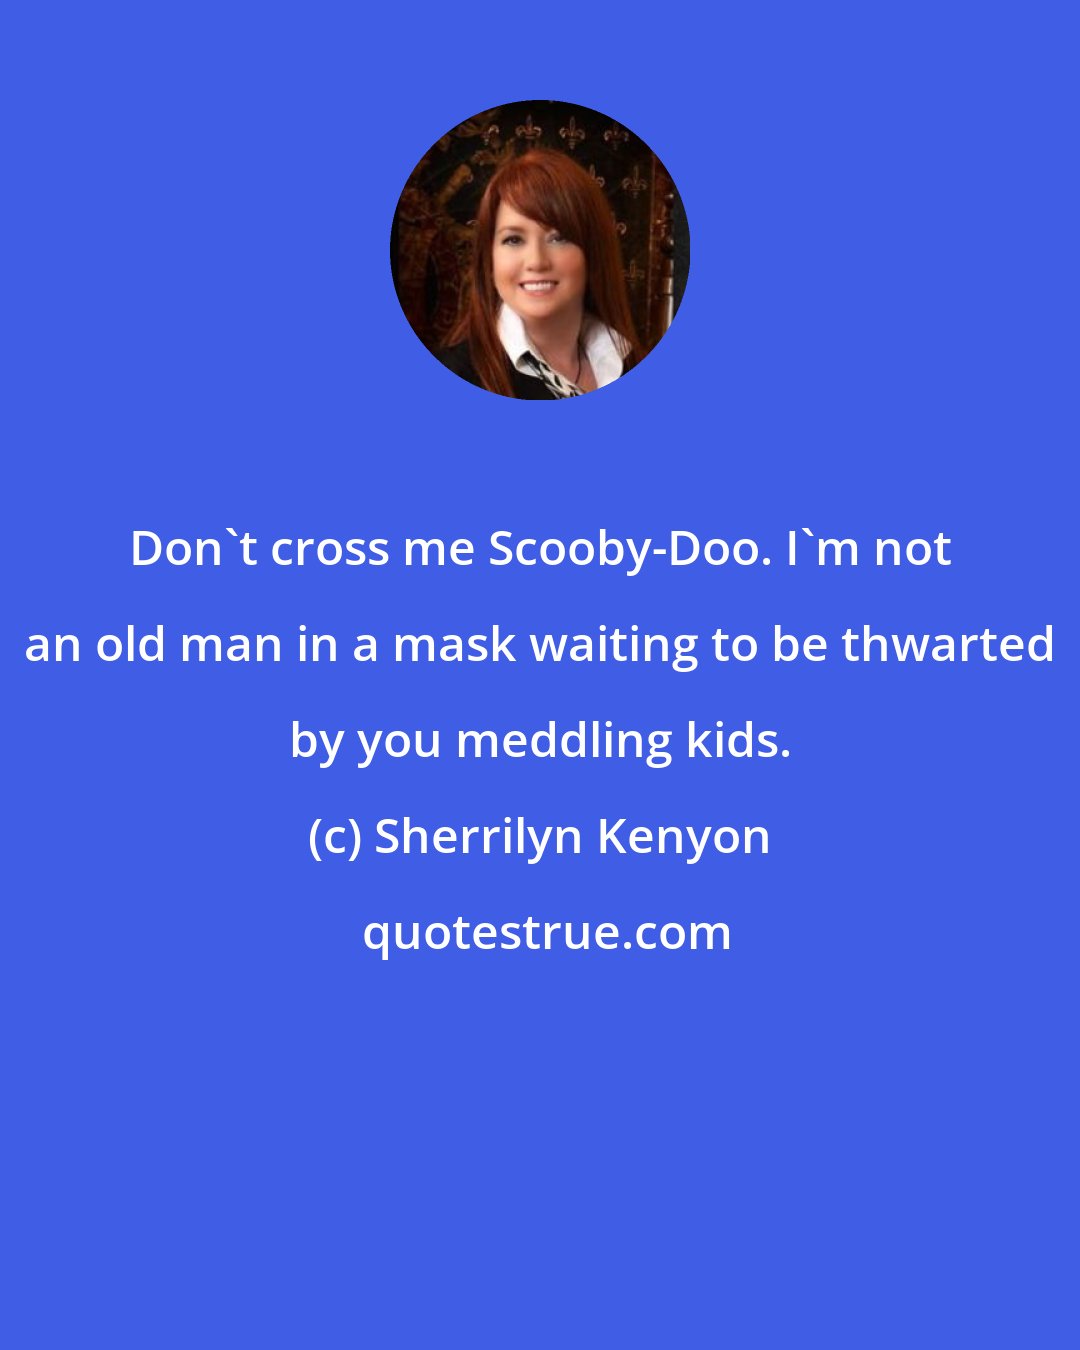 Sherrilyn Kenyon: Don't cross me Scooby-Doo. I'm not an old man in a mask waiting to be thwarted by you meddling kids.